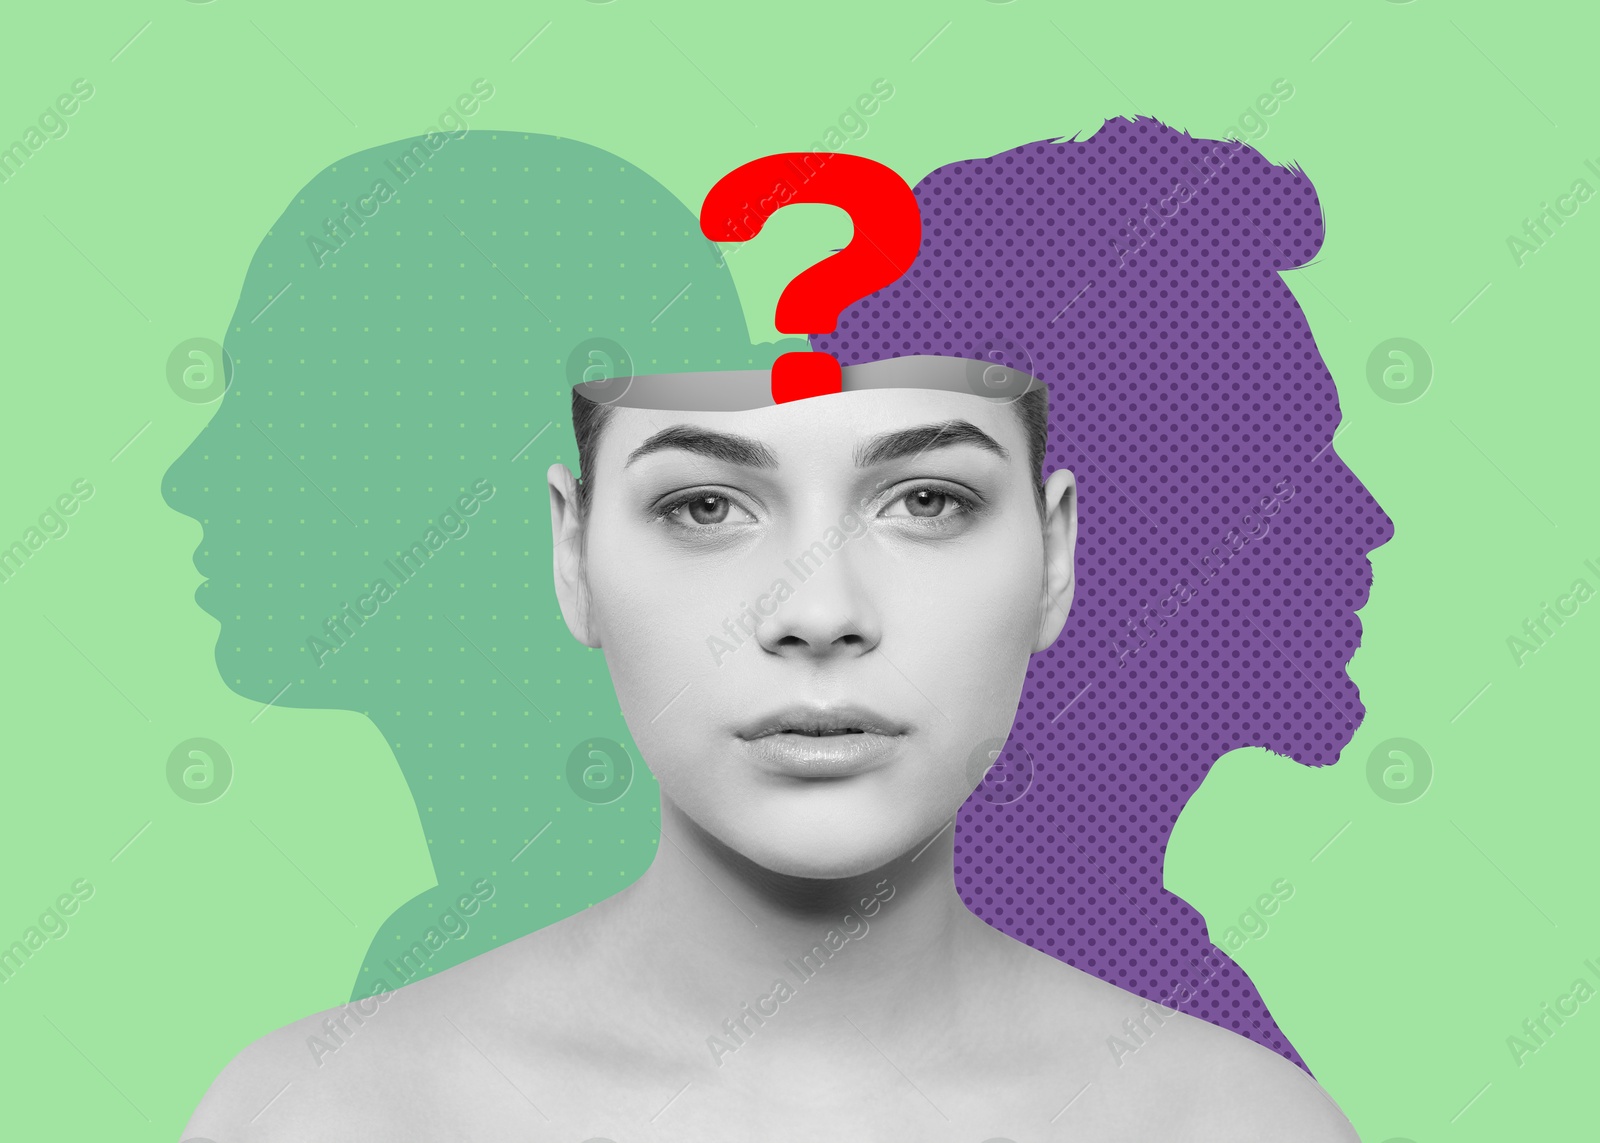 Image of Amnesia. Collage of woman with question mark in head and silhouettes of people on green background